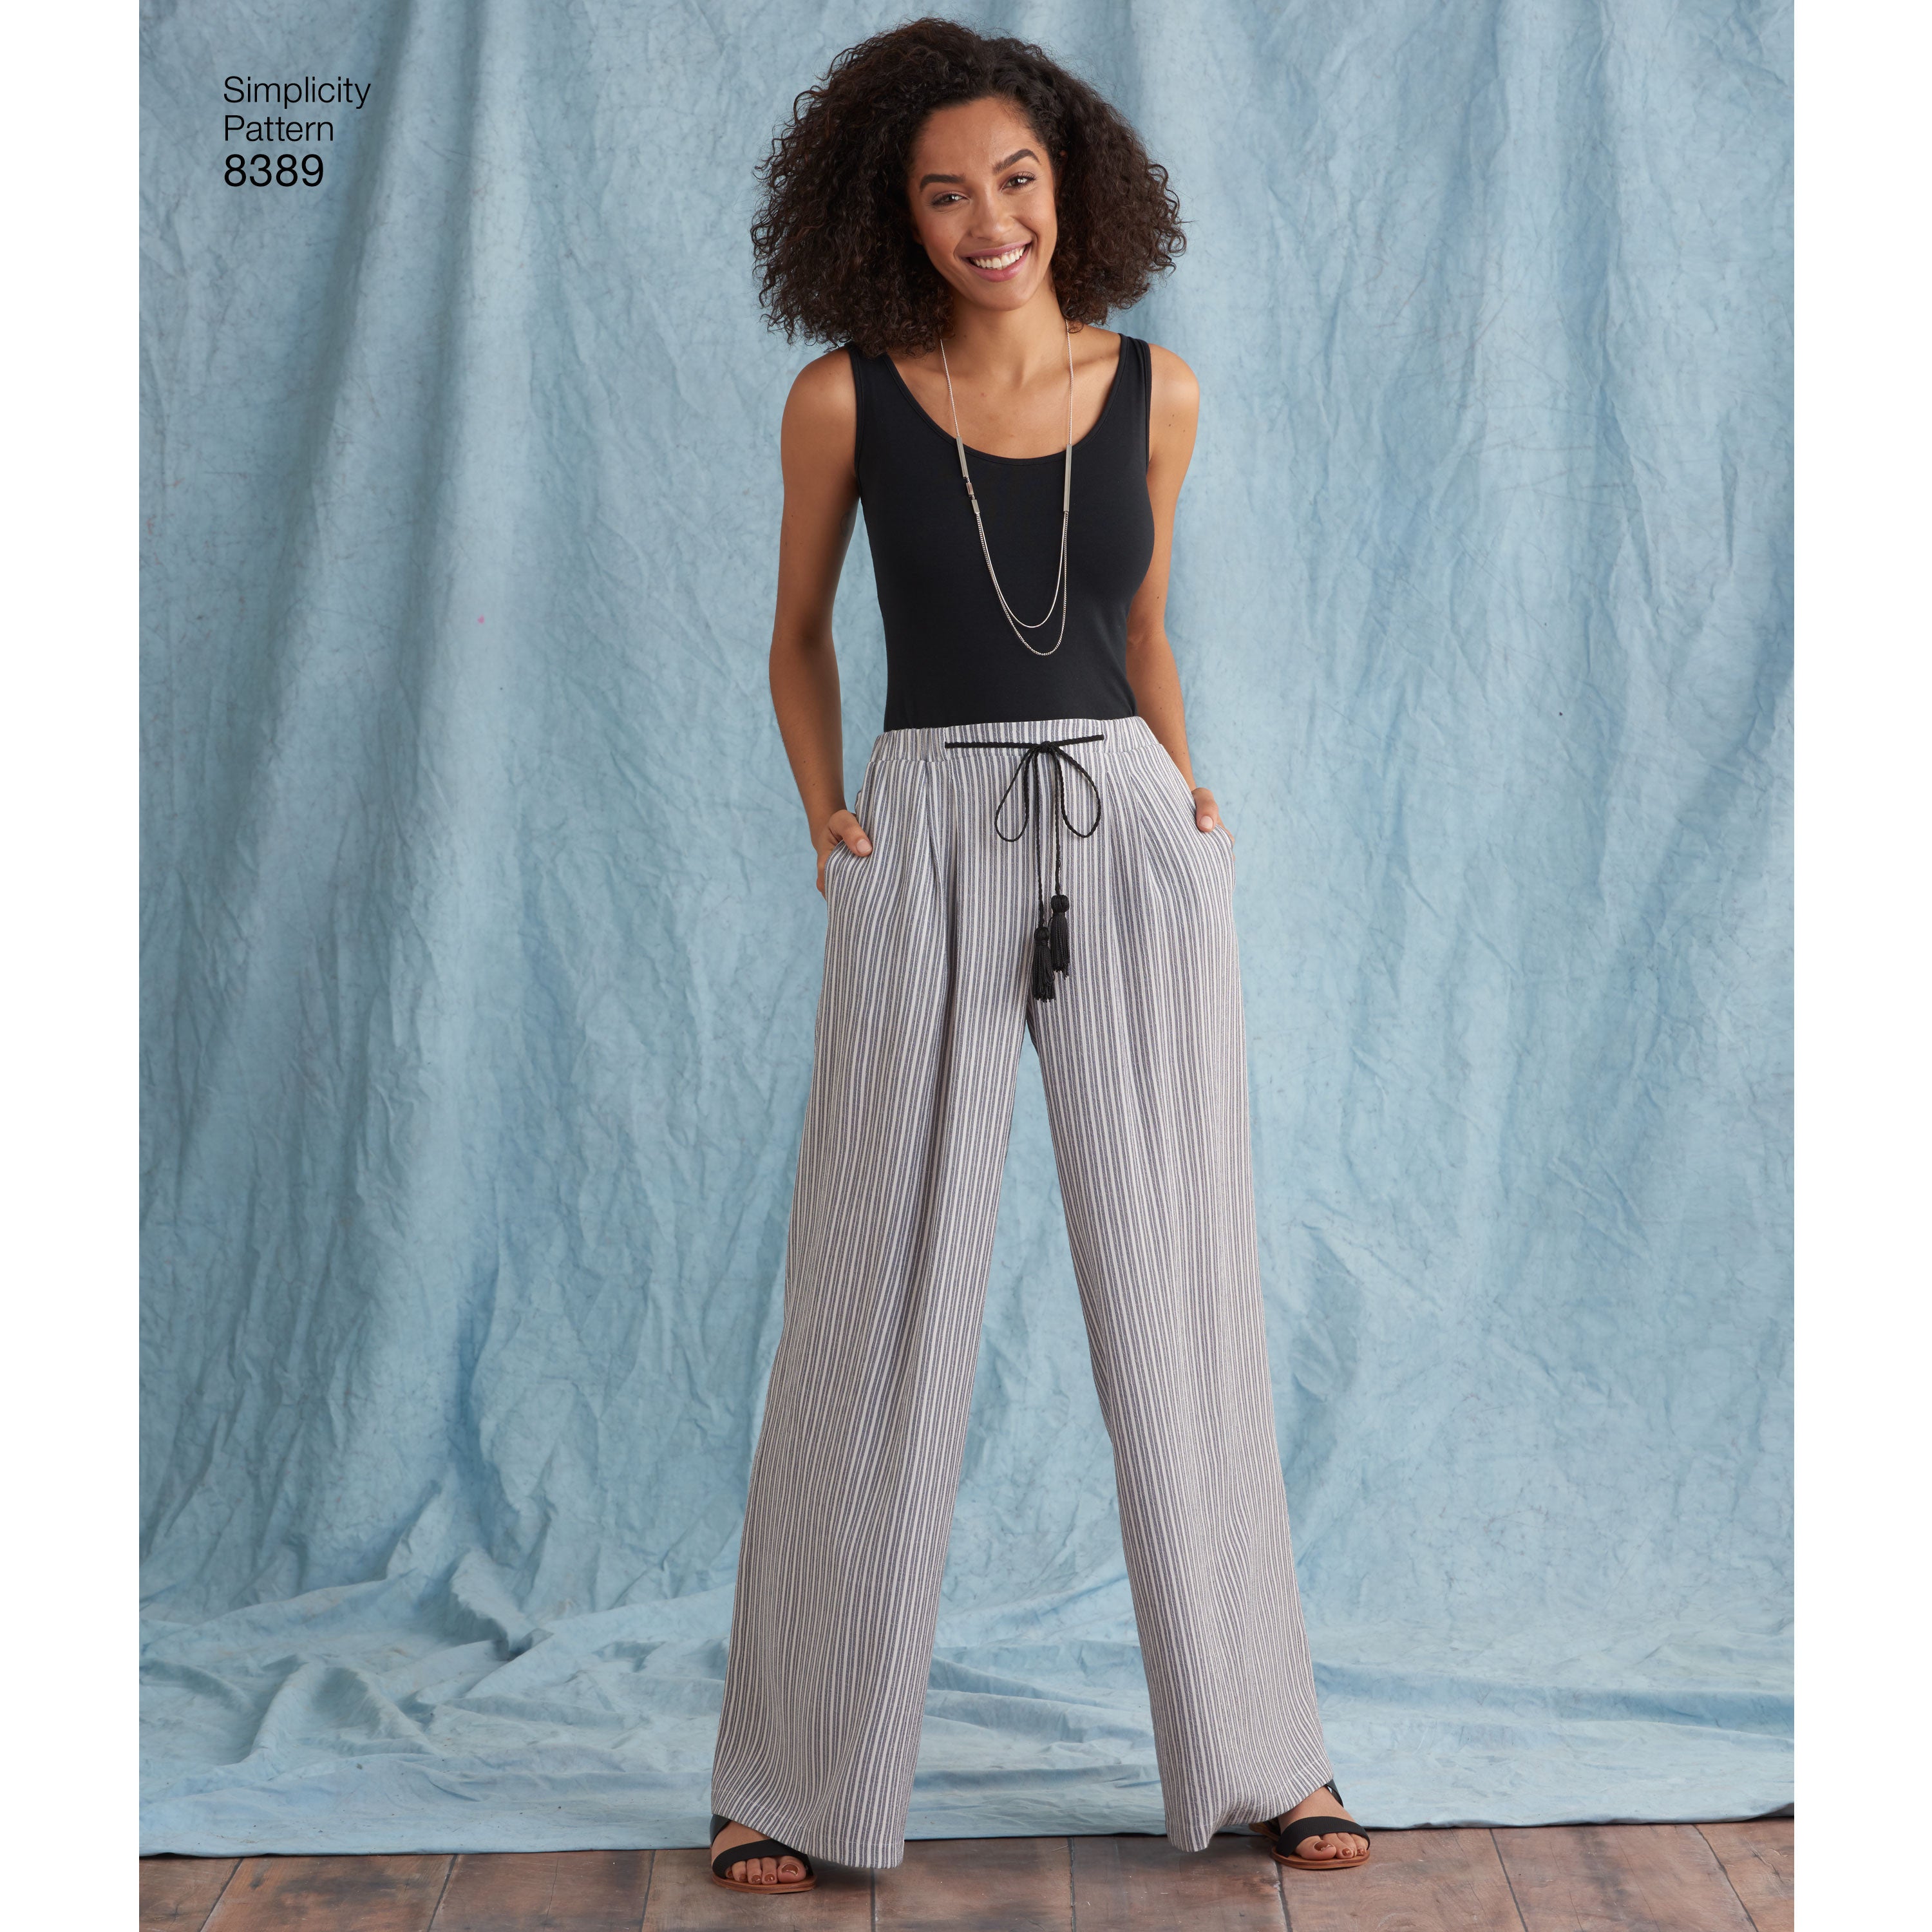 Burda Misses Plus Casual Pull On Drawstring Trousers Sewing Pattern